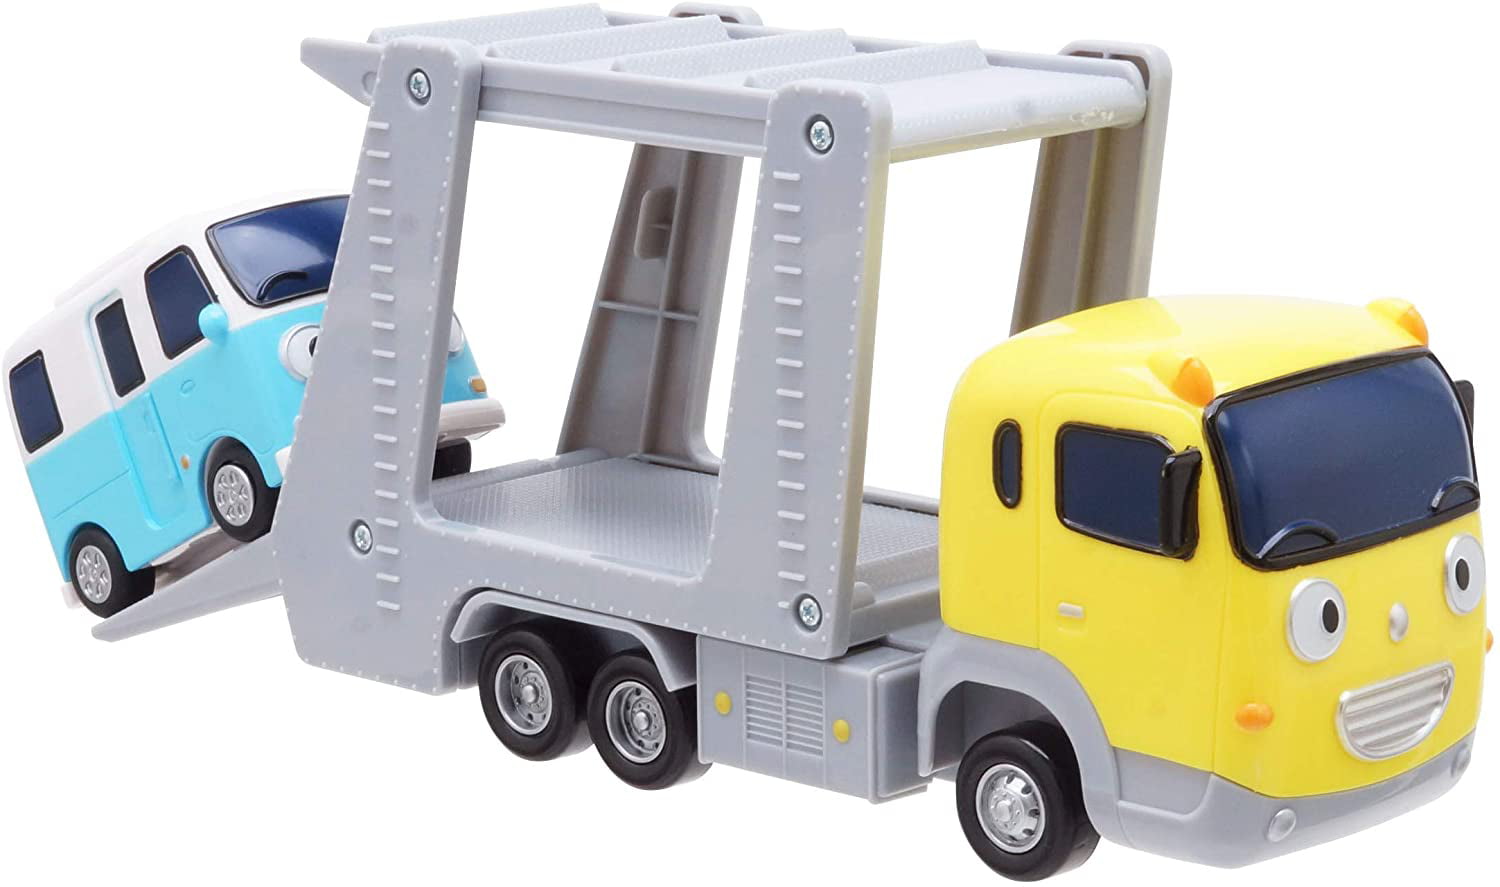 TAYO The Little Bus Special Friends Set Series (Carry & Bongbong) - Walmart .com